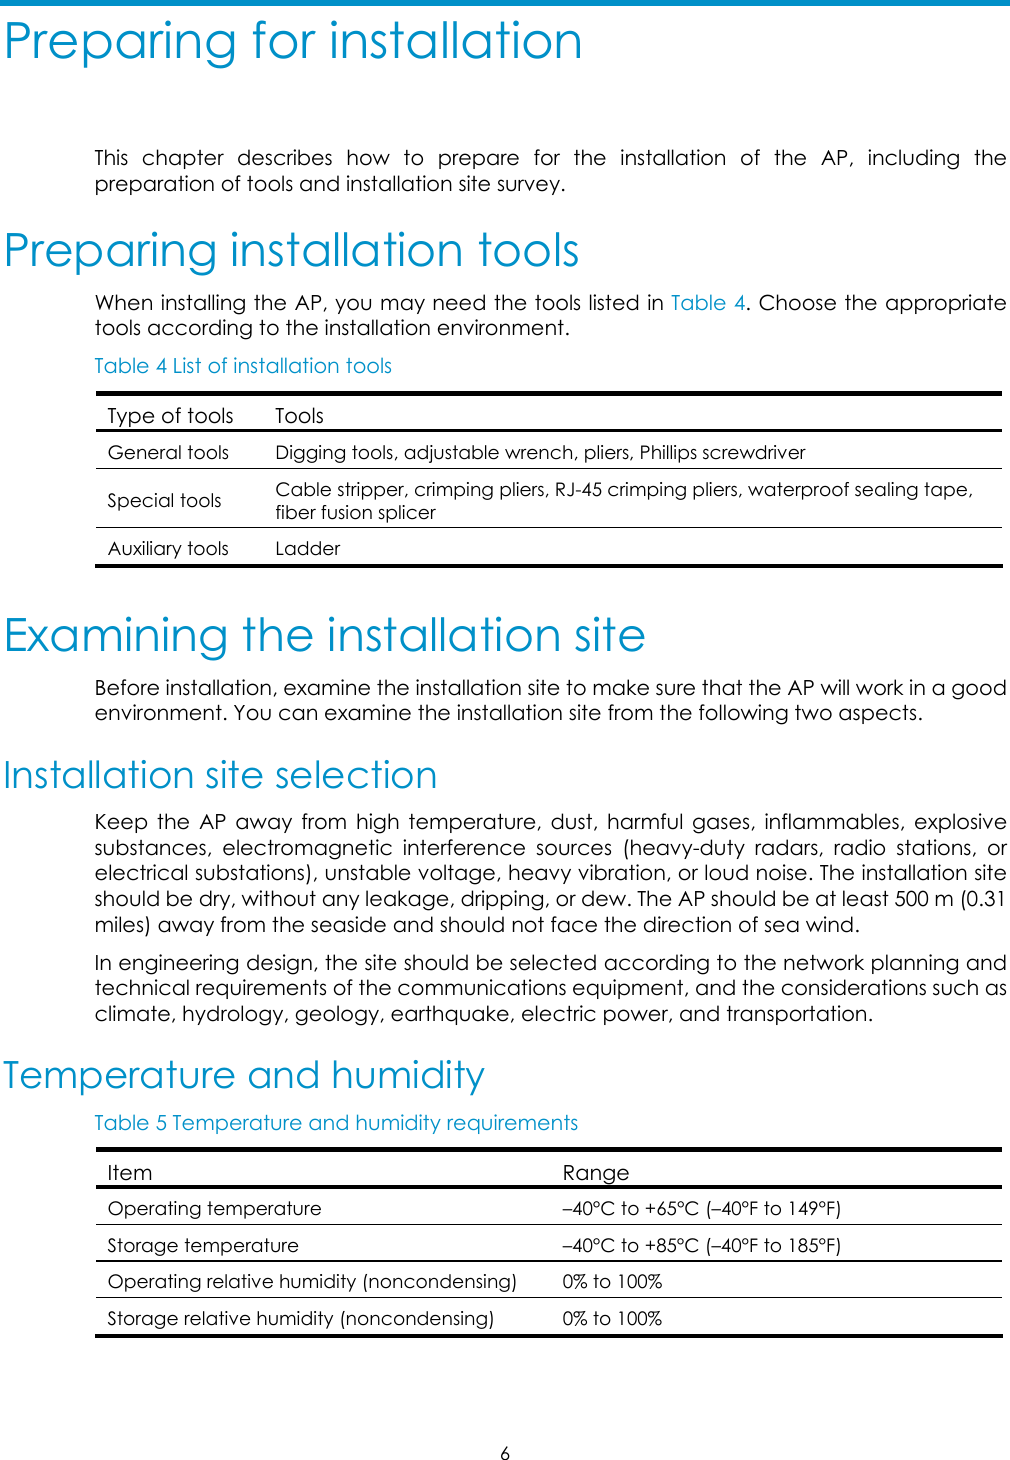  6 Preparing for installation This chapter describes how to prepare for the installation of the AP, including the preparation of tools and installation site survey.  Preparing installation tools When installing the AP, you may need the tools listed in Table 4. Choose the appropriate tools according to the installation environment.  Table 4 List of installation tools Type of tools  Tools General tools  Digging tools, adjustable wrench, pliers, Phillips screwdriver  Special tools  Cable stripper, crimping pliers, RJ-45 crimping pliers, waterproof sealing tape, fiber fusion splicer  Auxiliary tools  Ladder  Examining the installation site Before installation, examine the installation site to make sure that the AP will work in a good environment. You can examine the installation site from the following two aspects. Installation site selection  Keep the AP away from high temperature, dust, harmful gases, inflammables, explosive substances, electromagnetic interference sources (heavy-duty radars, radio stations, or electrical substations), unstable voltage, heavy vibration, or loud noise. The installation site should be dry, without any leakage, dripping, or dew. The AP should be at least 500 m (0.31 miles) away from the seaside and should not face the direction of sea wind. In engineering design, the site should be selected according to the network planning and technical requirements of the communications equipment, and the considerations such as climate, hydrology, geology, earthquake, electric power, and transportation. Temperature and humidity  Table 5 Temperature and humidity requirements  Item Range Operating temperature  –40°C to +65°C (–40°F to 149°F) Storage temperature  –40°C to +85°C (–40°F to 185°F) Operating relative humidity (noncondensing)  0% to 100% Storage relative humidity (noncondensing)  0% to 100%  